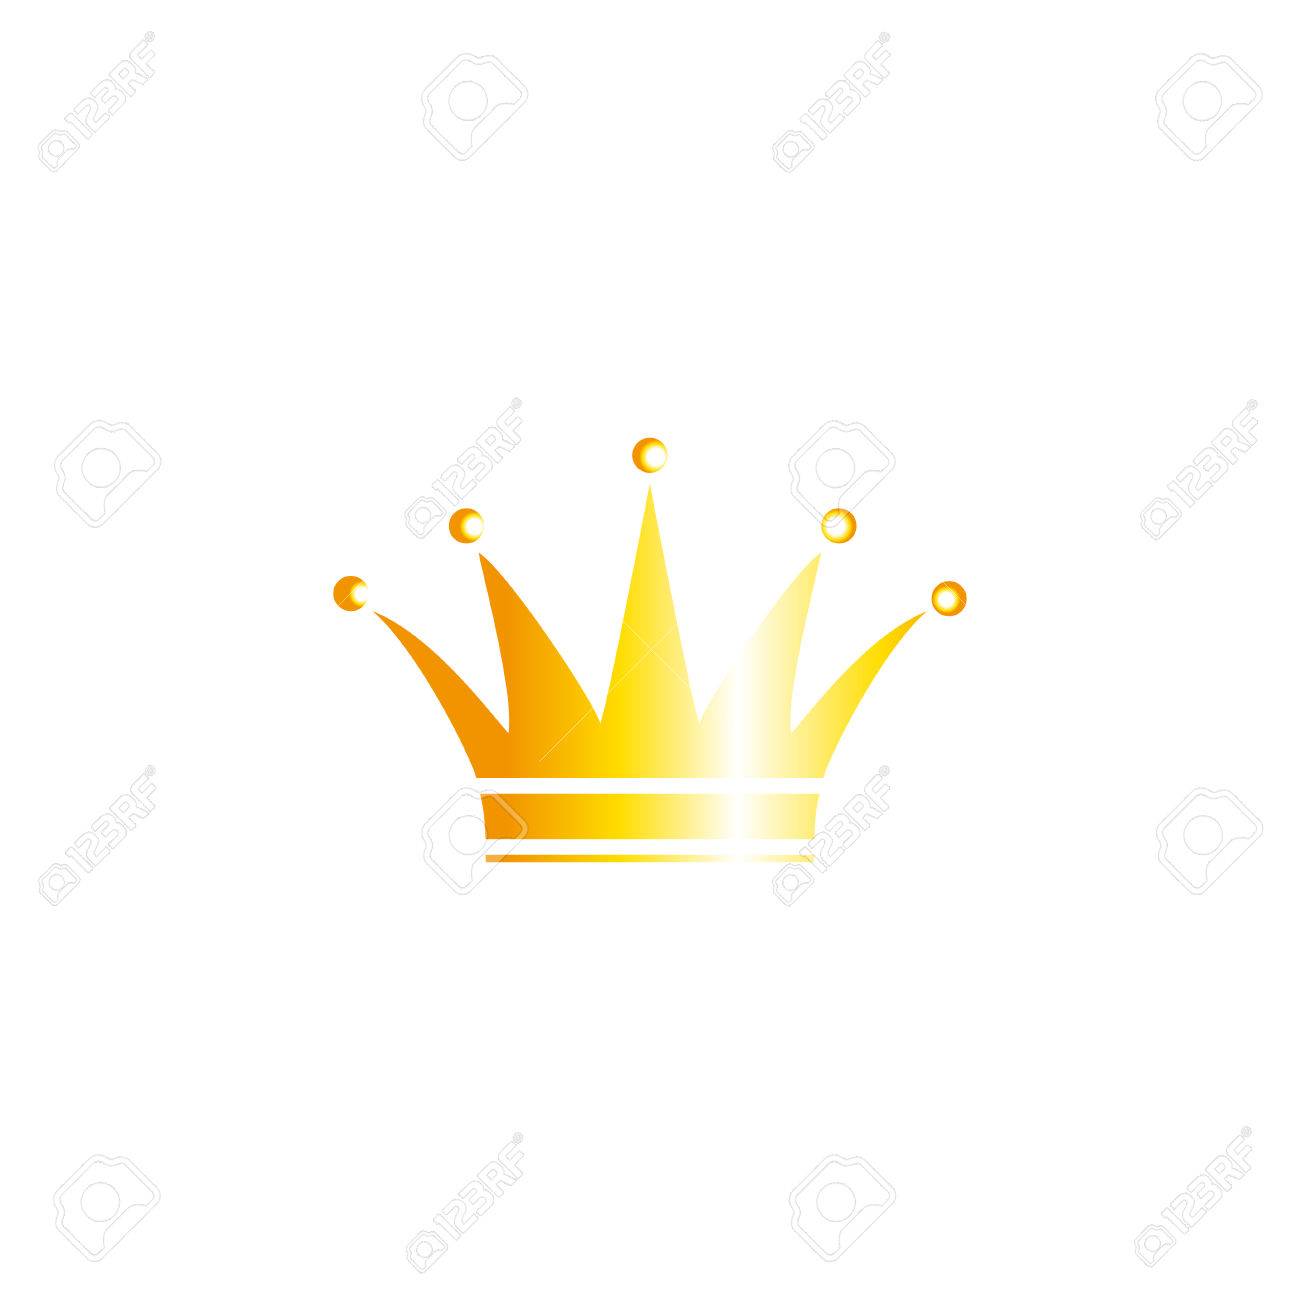 Gold Crown Isolated On White Background For Your Design Royalty